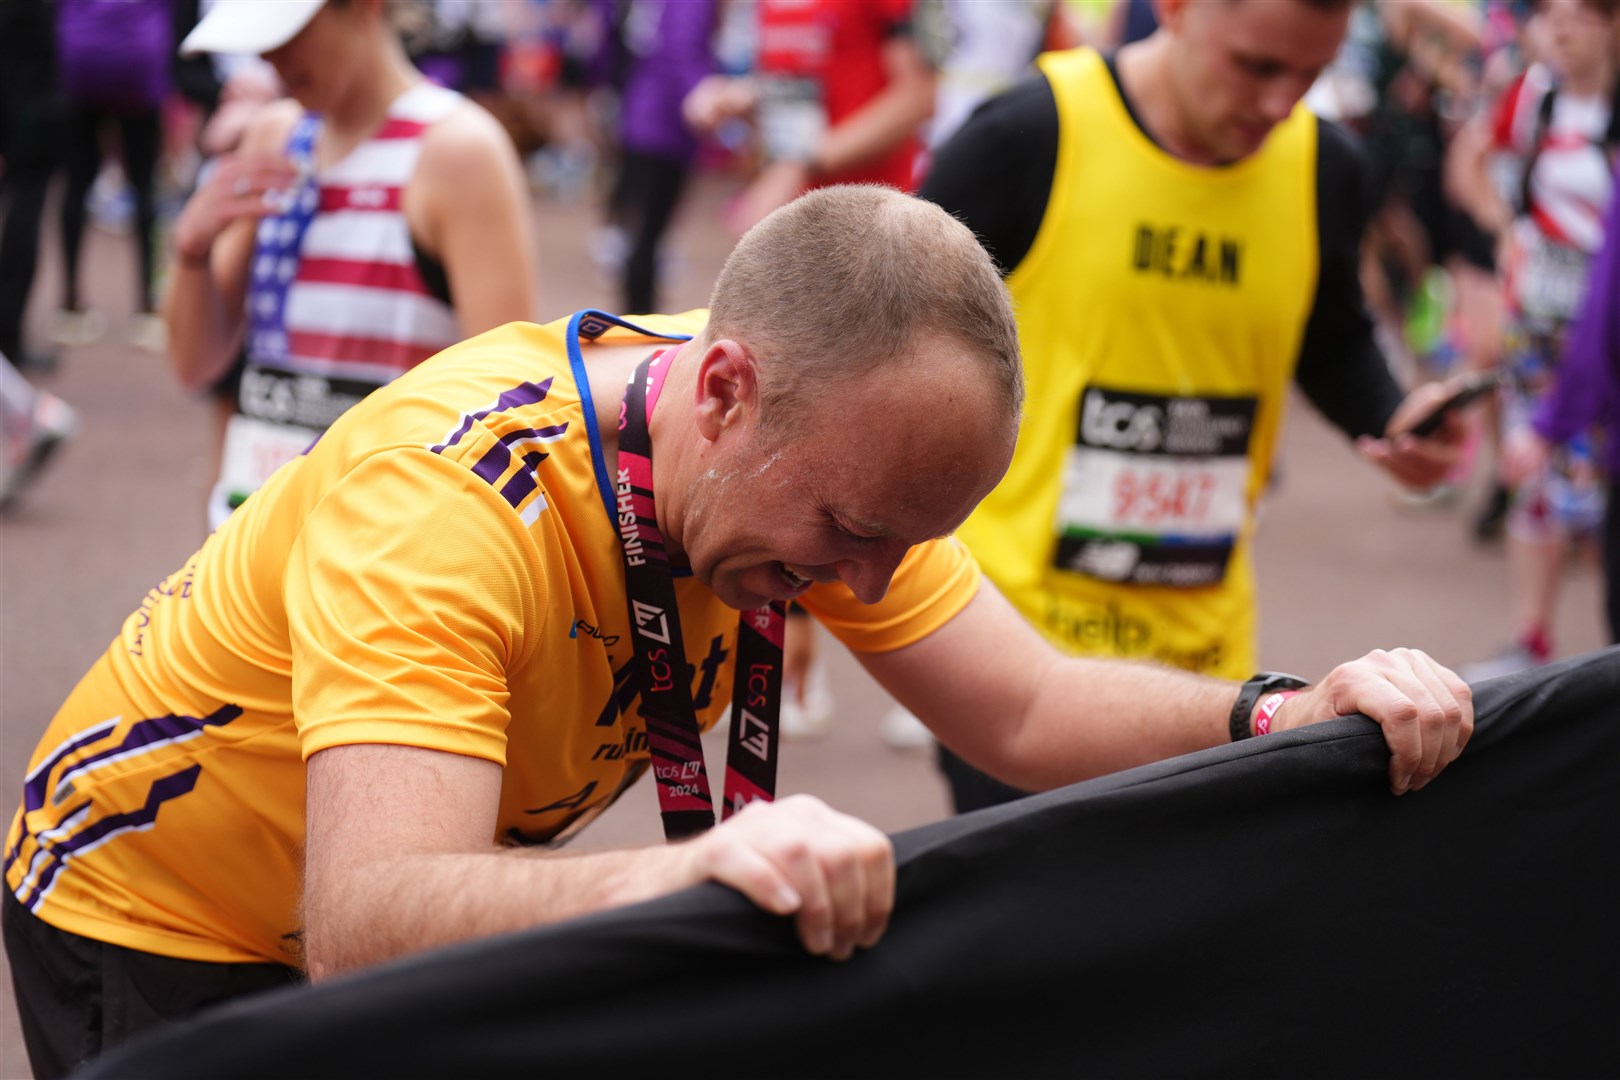 Matt Hancock, who ran for the Assisted Learning Foundation, wrote on his Instagram that he was ‘absolutely thrilled’ to have finished the marathon in under four hours (John Walton/PA)